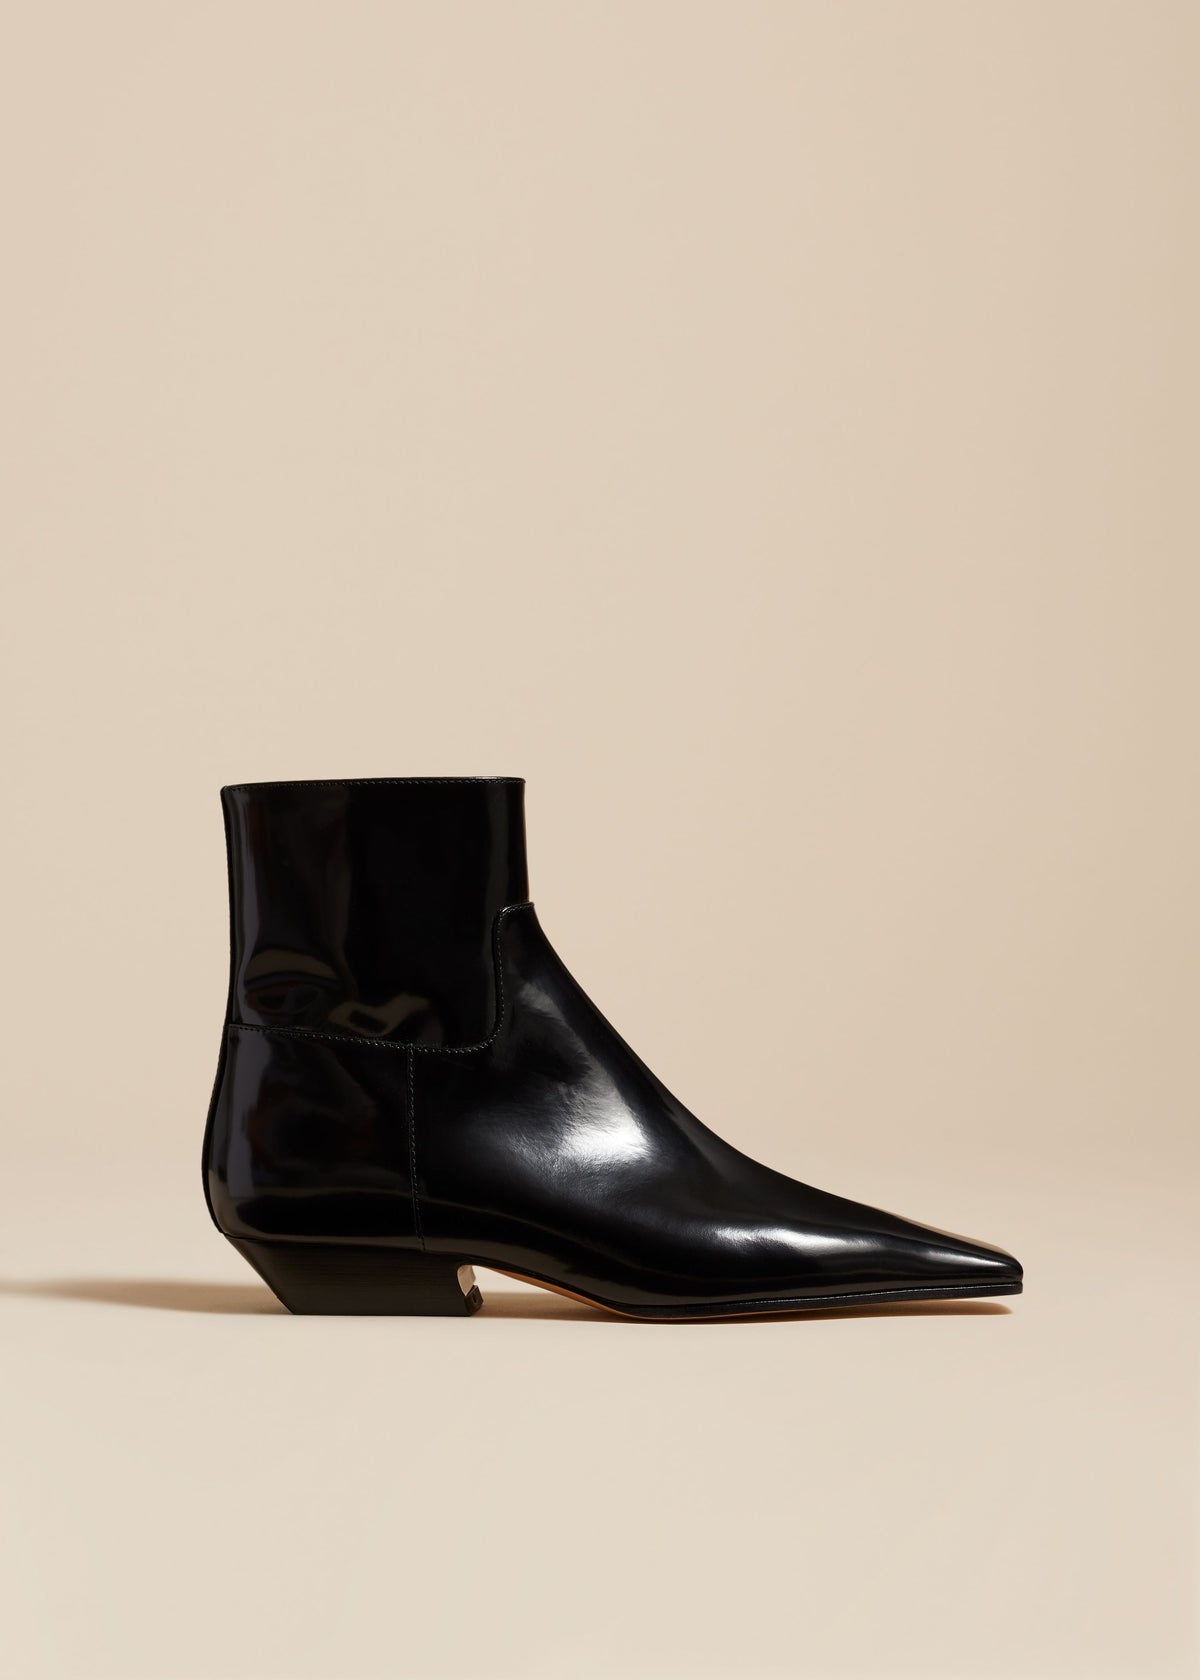 The Marfa Ankle Boot in Black Brushed Leather - 1